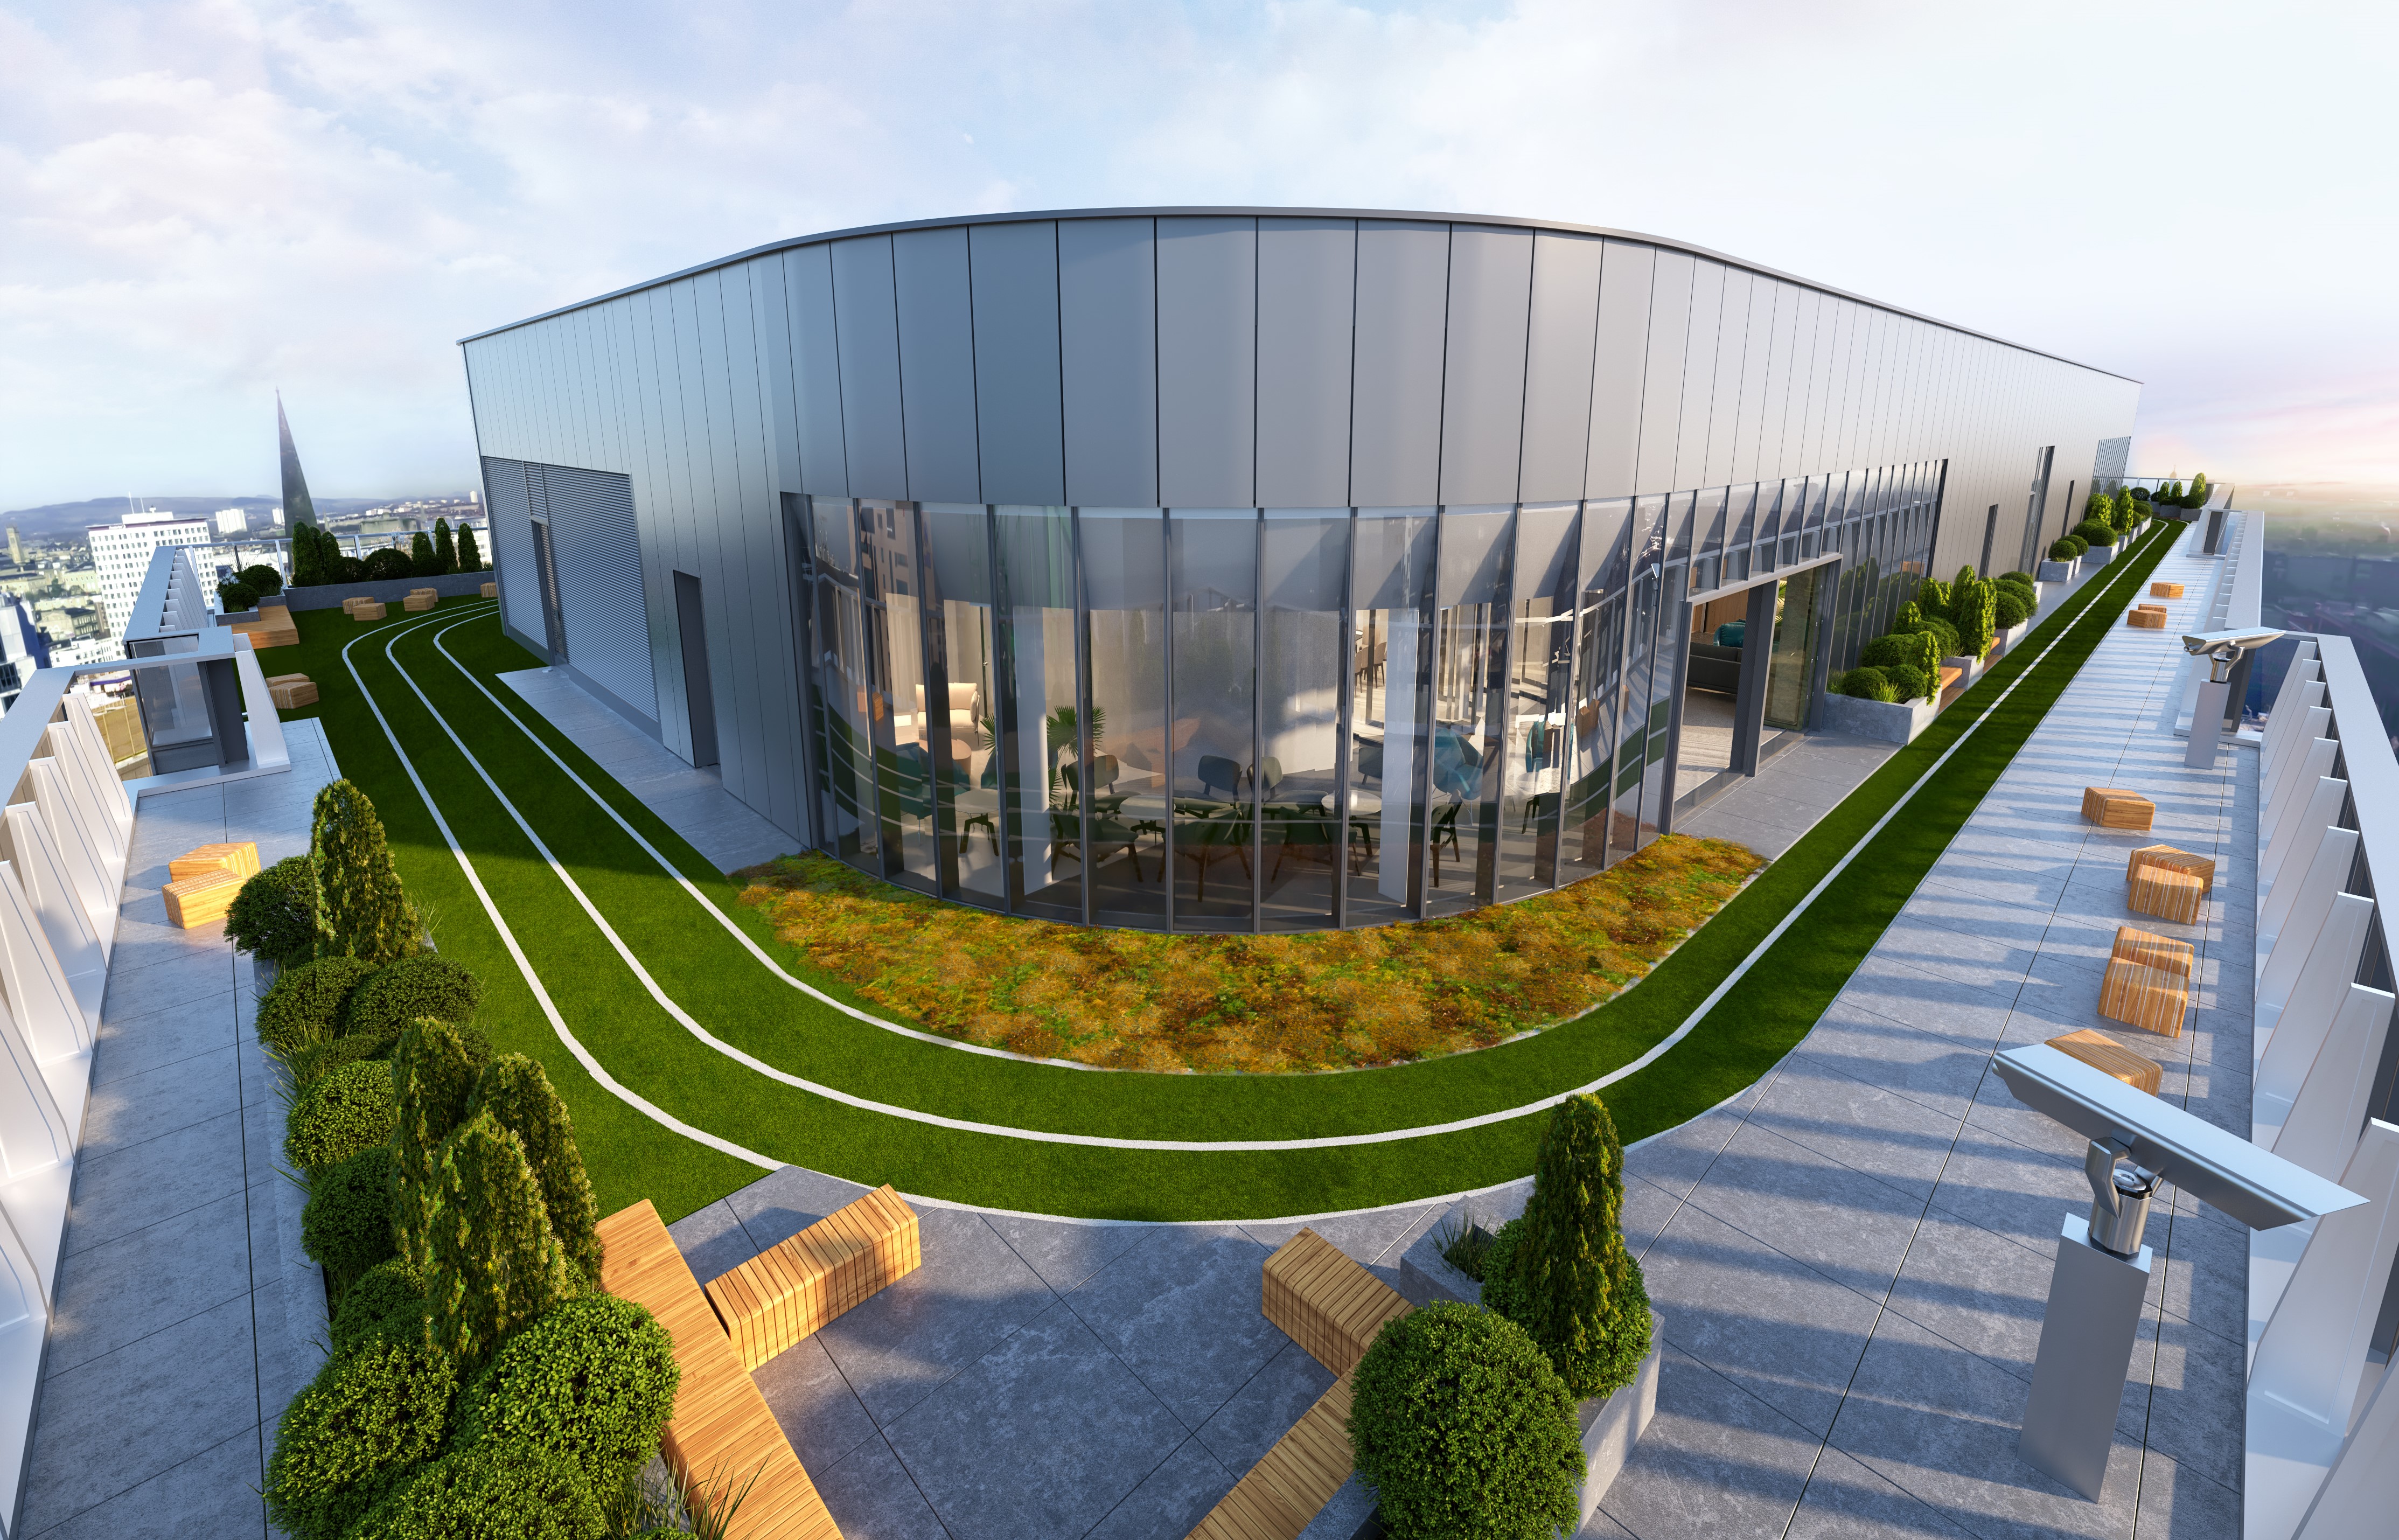 Future-proofing Scotland’s most ambitious new office space with Ravatherm XPS X ULTRA 300 SL